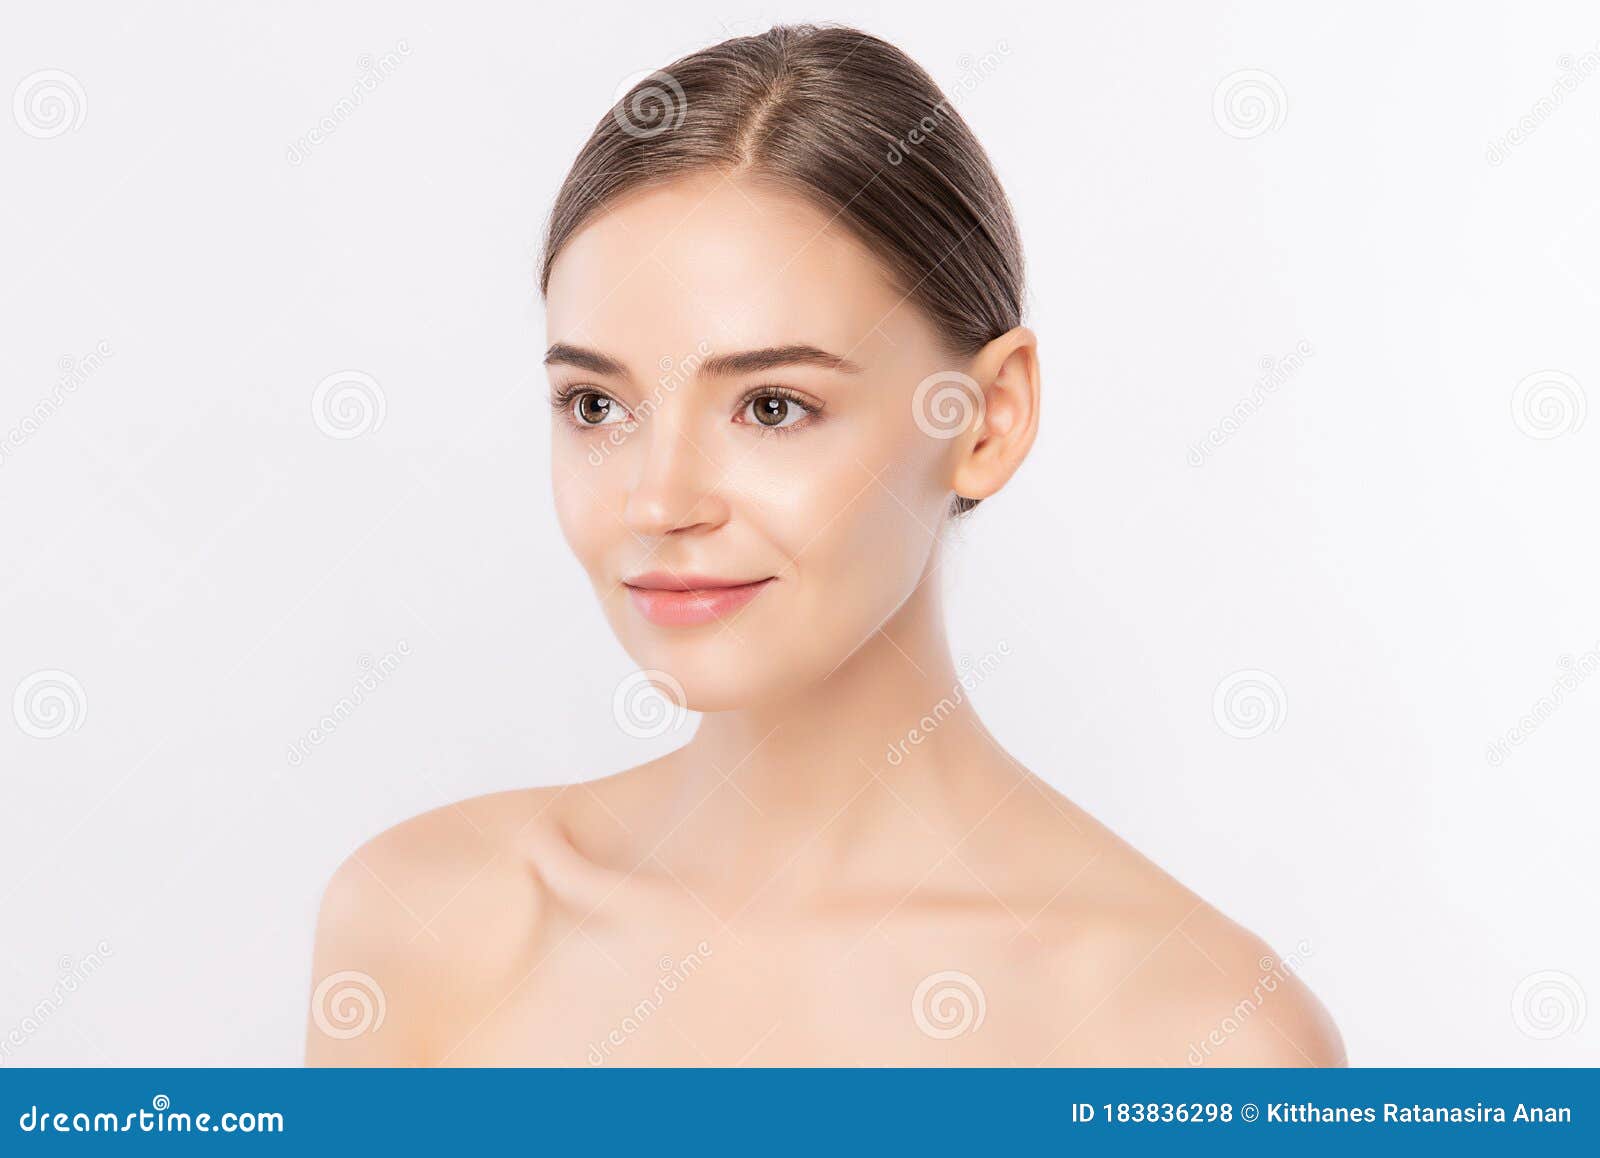 Beauty And Care. Portrait Of Girl With Towel On Head 